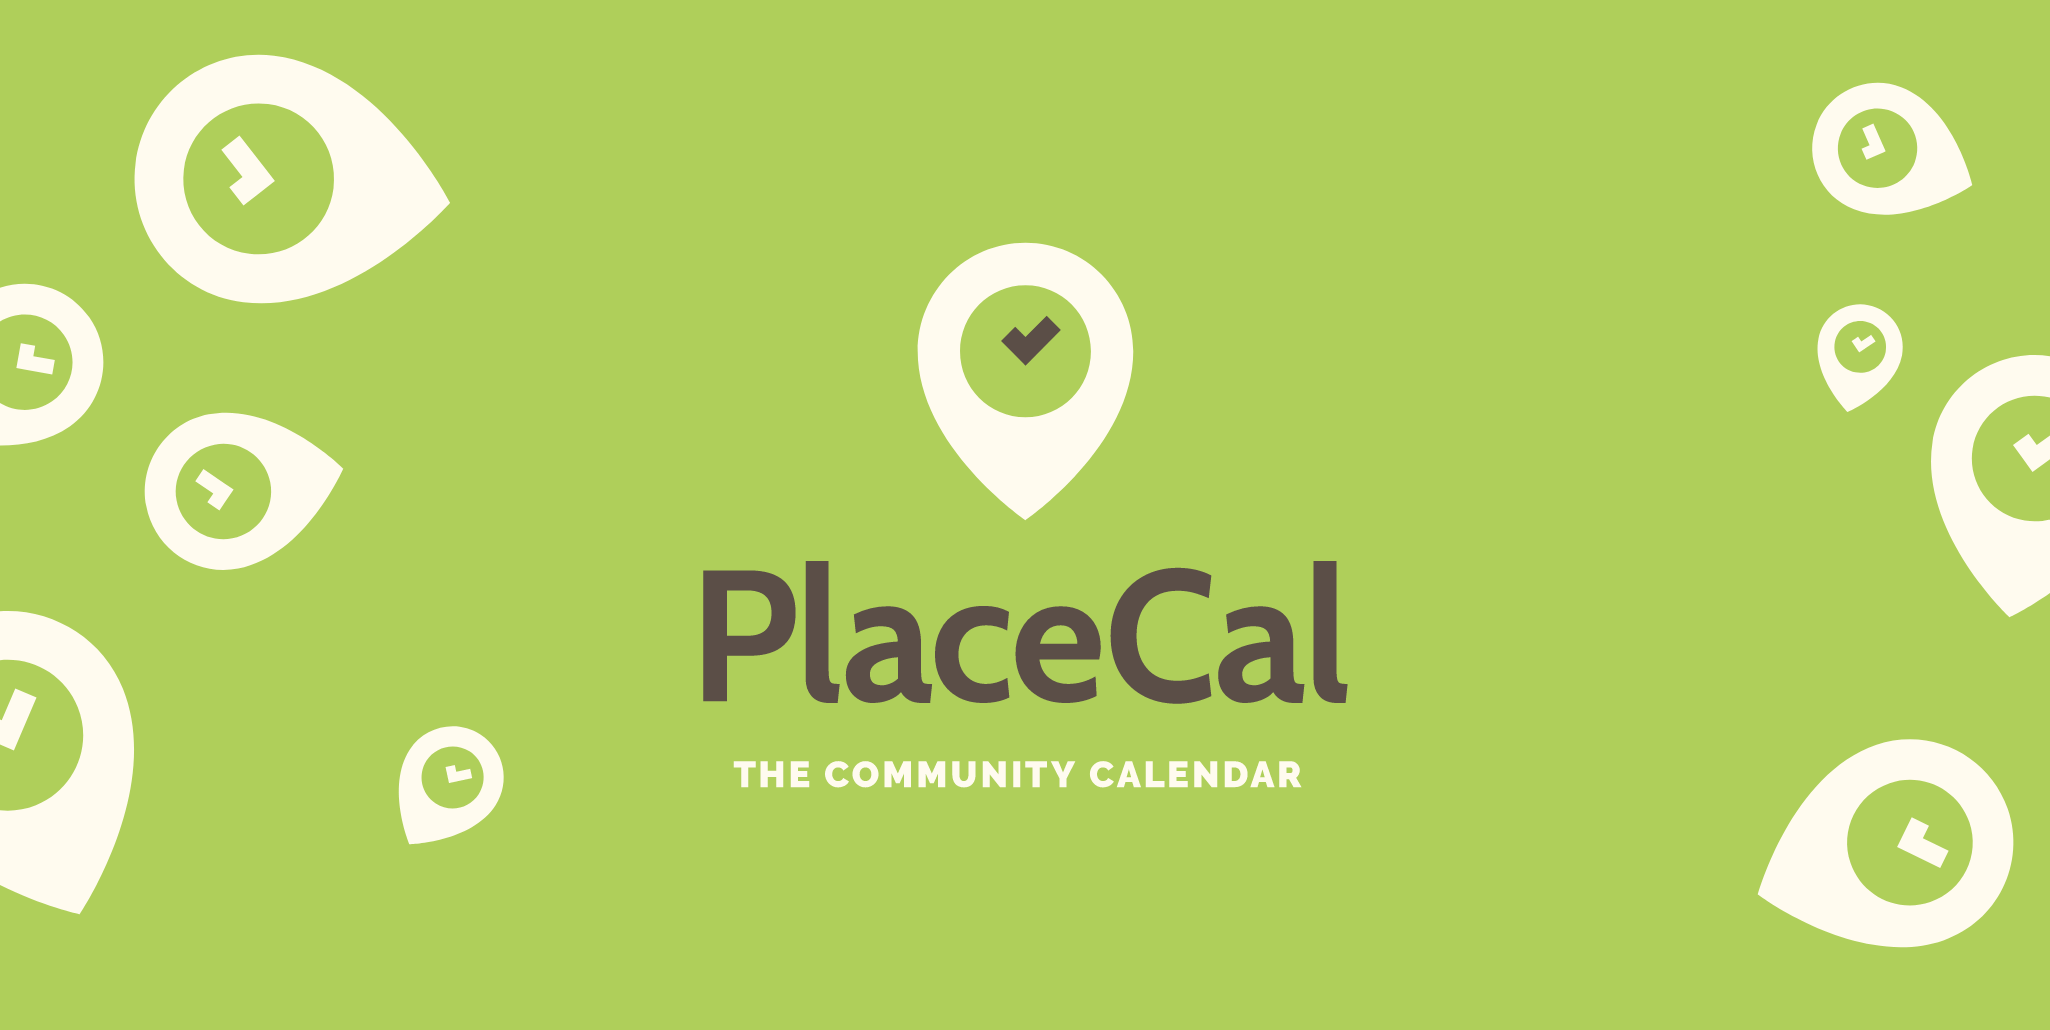 PlaceCal's logo on a background showing the clockface inside a map marker device